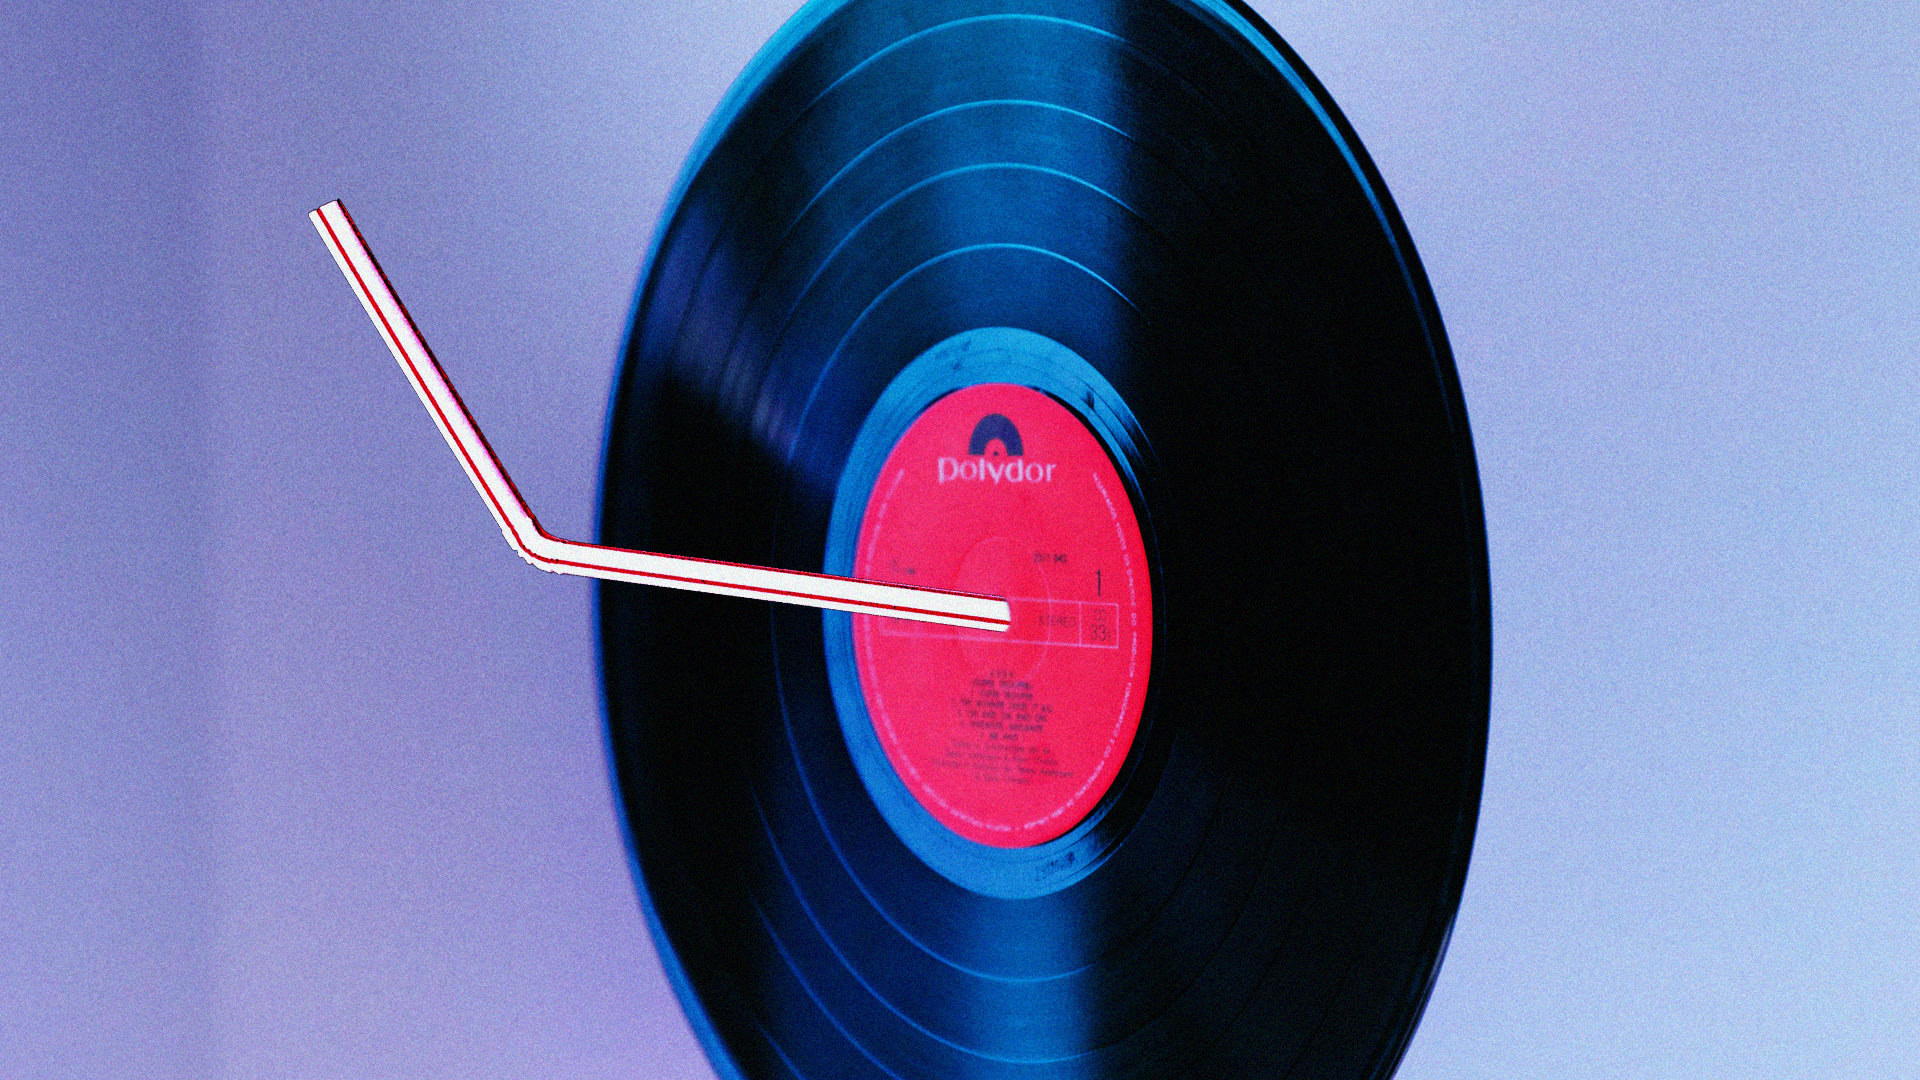 Bacardi just found the best use for plastic straws ever—turn them into vinyl records